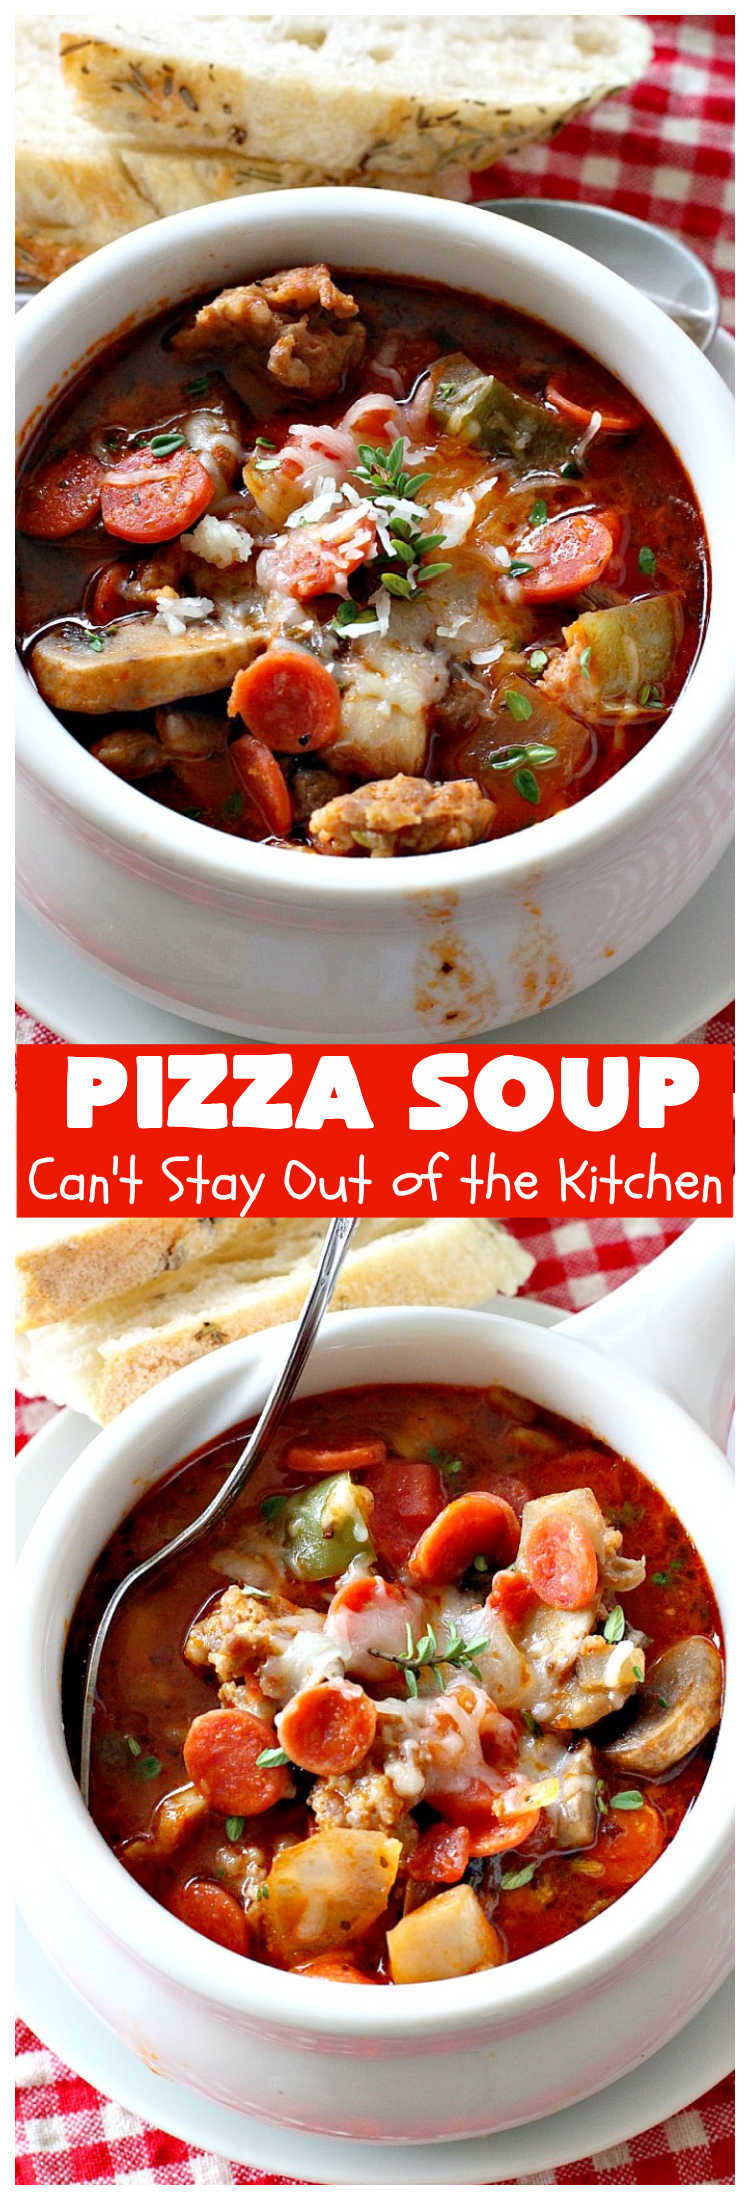 Pizza Soup | Can't Stay Out of the Kitchen | this easy 30-minute #soup is like eating your favorite #pepperoni or #Italian #sausage #pizza but in soup form! It's absolutely terrific. #GlutenFree #PizzaSoup